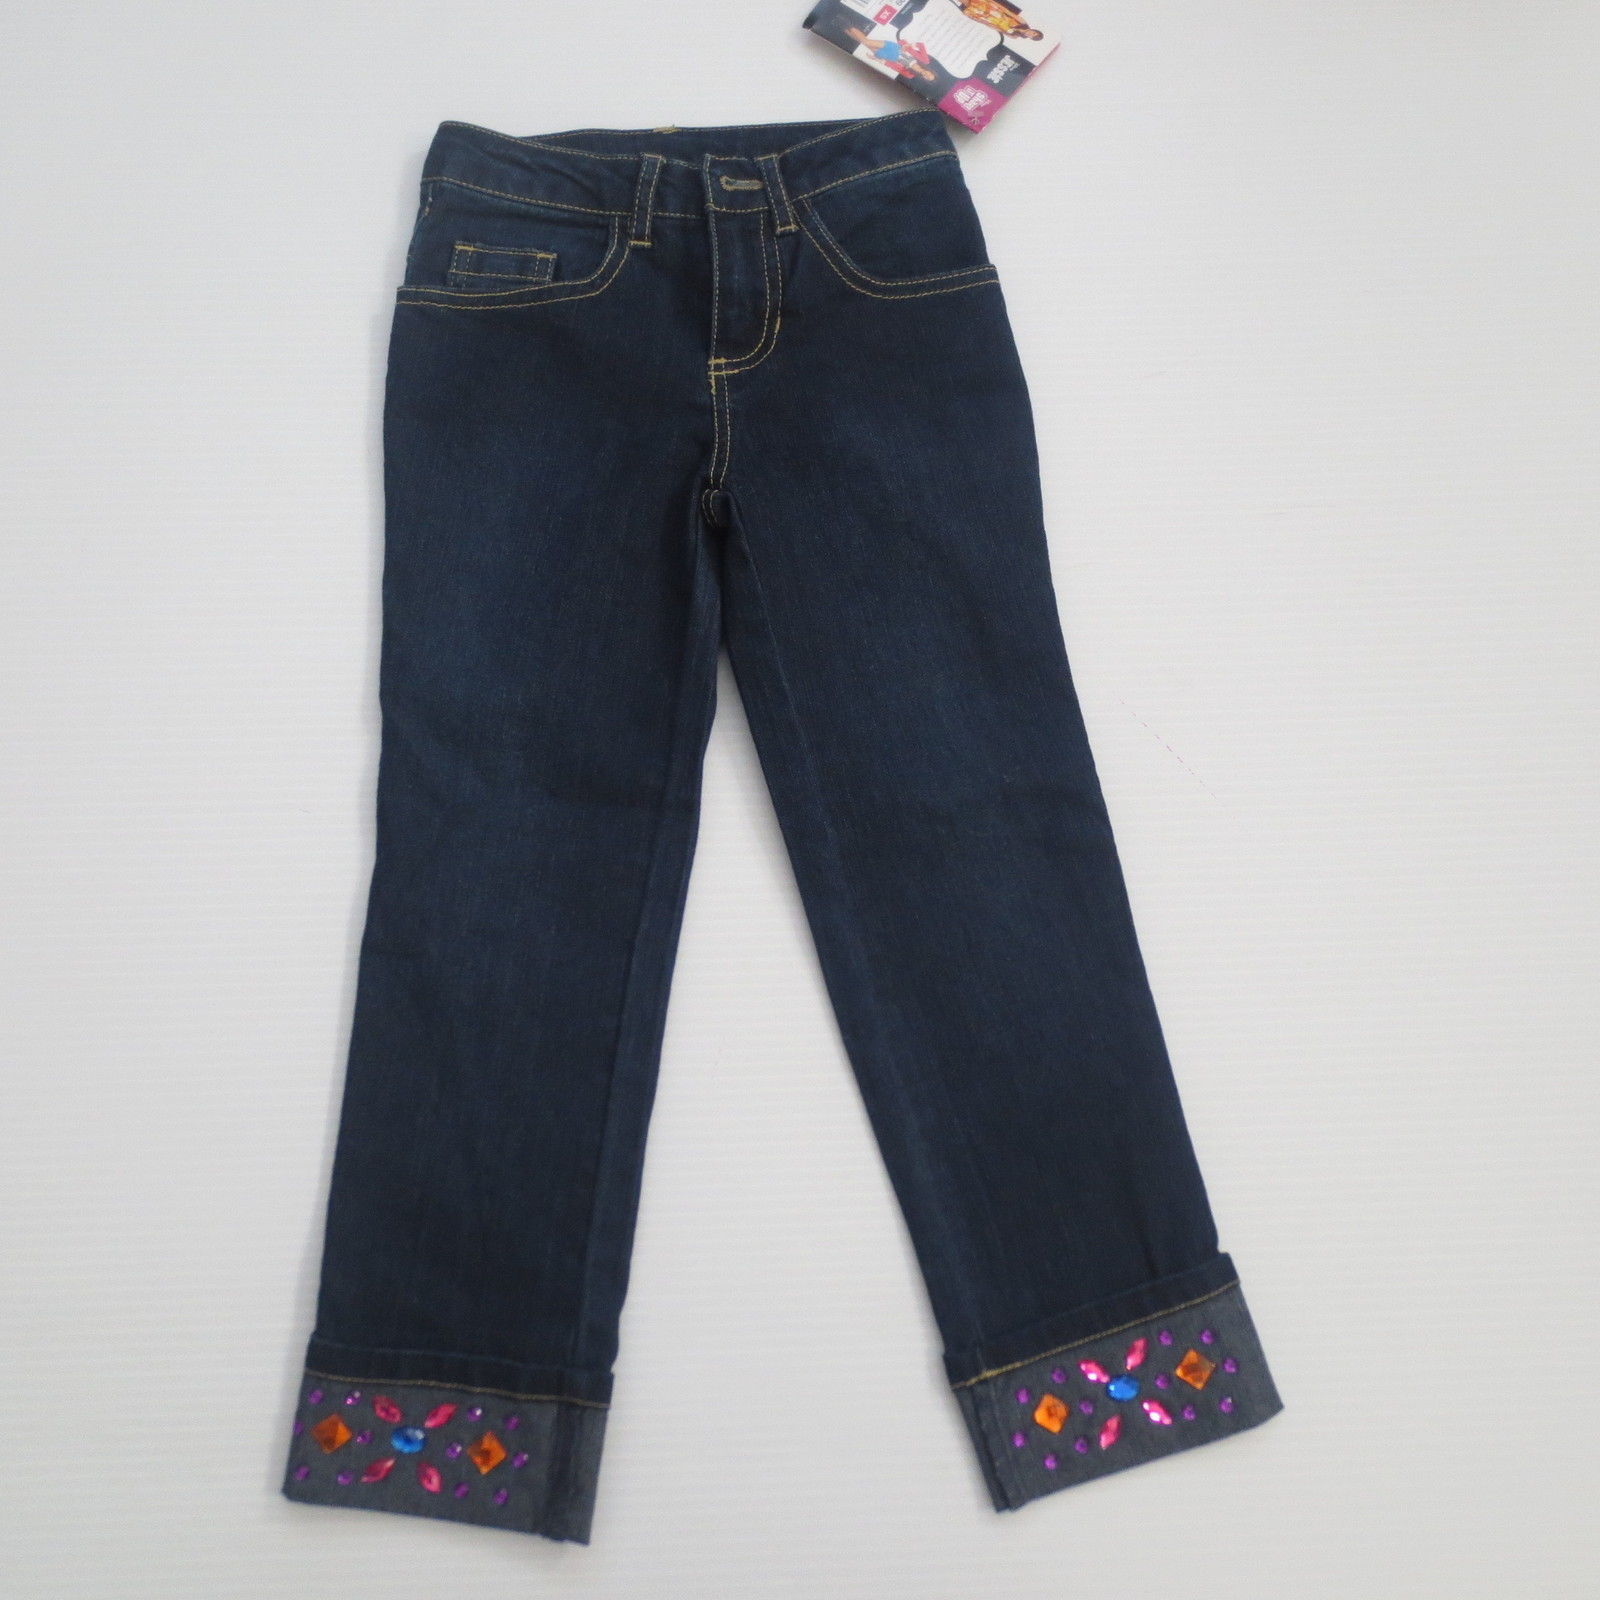 Disney Jessie Navy D Signed Style Diaries Jeans - Size XS - NWT - $12.99